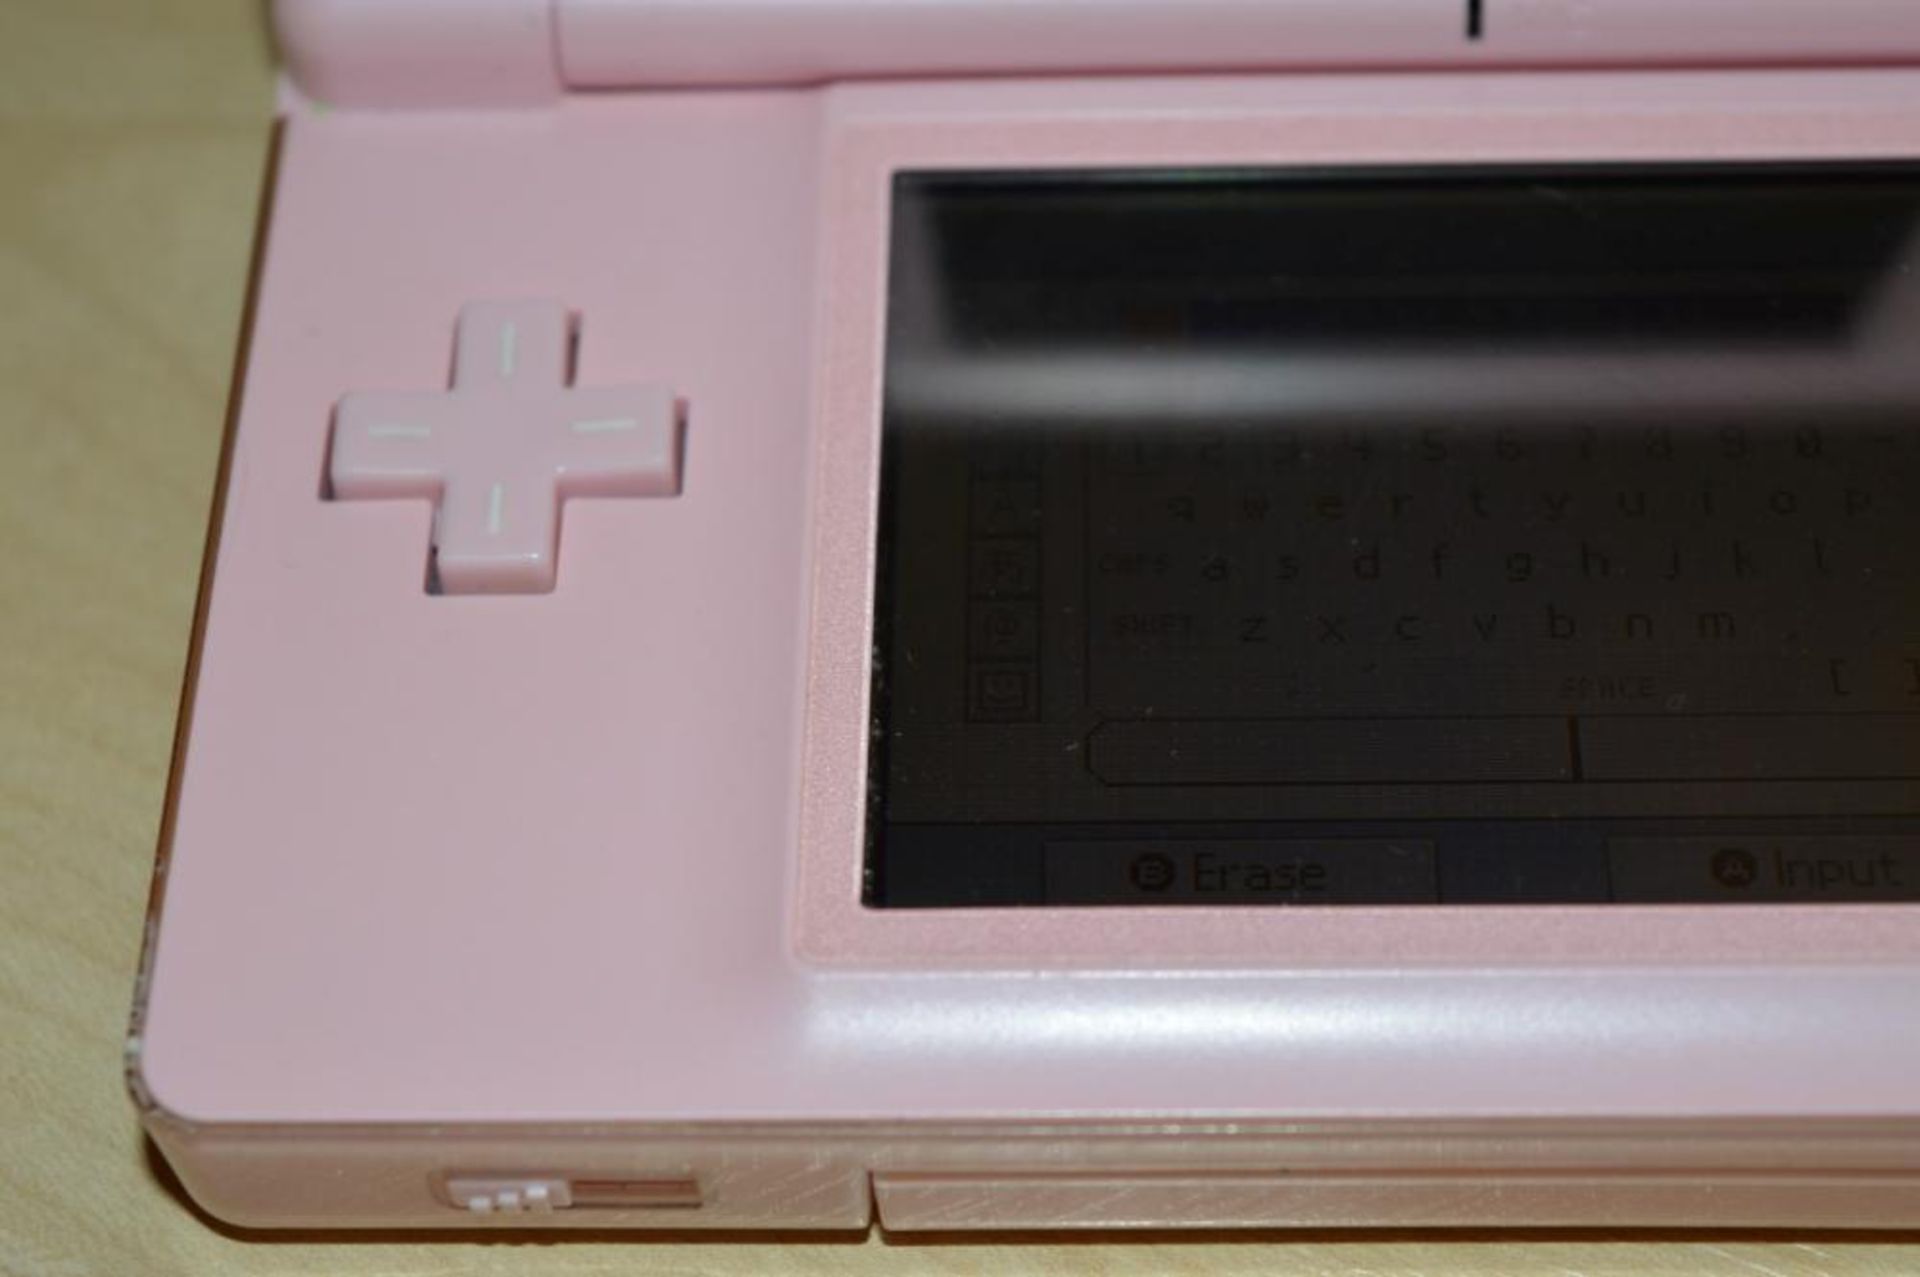 1 x Pink Nintendo DS Lite With High School Musical 2 Game - Includes Touch Pen and Charger - Good Co - Image 2 of 8